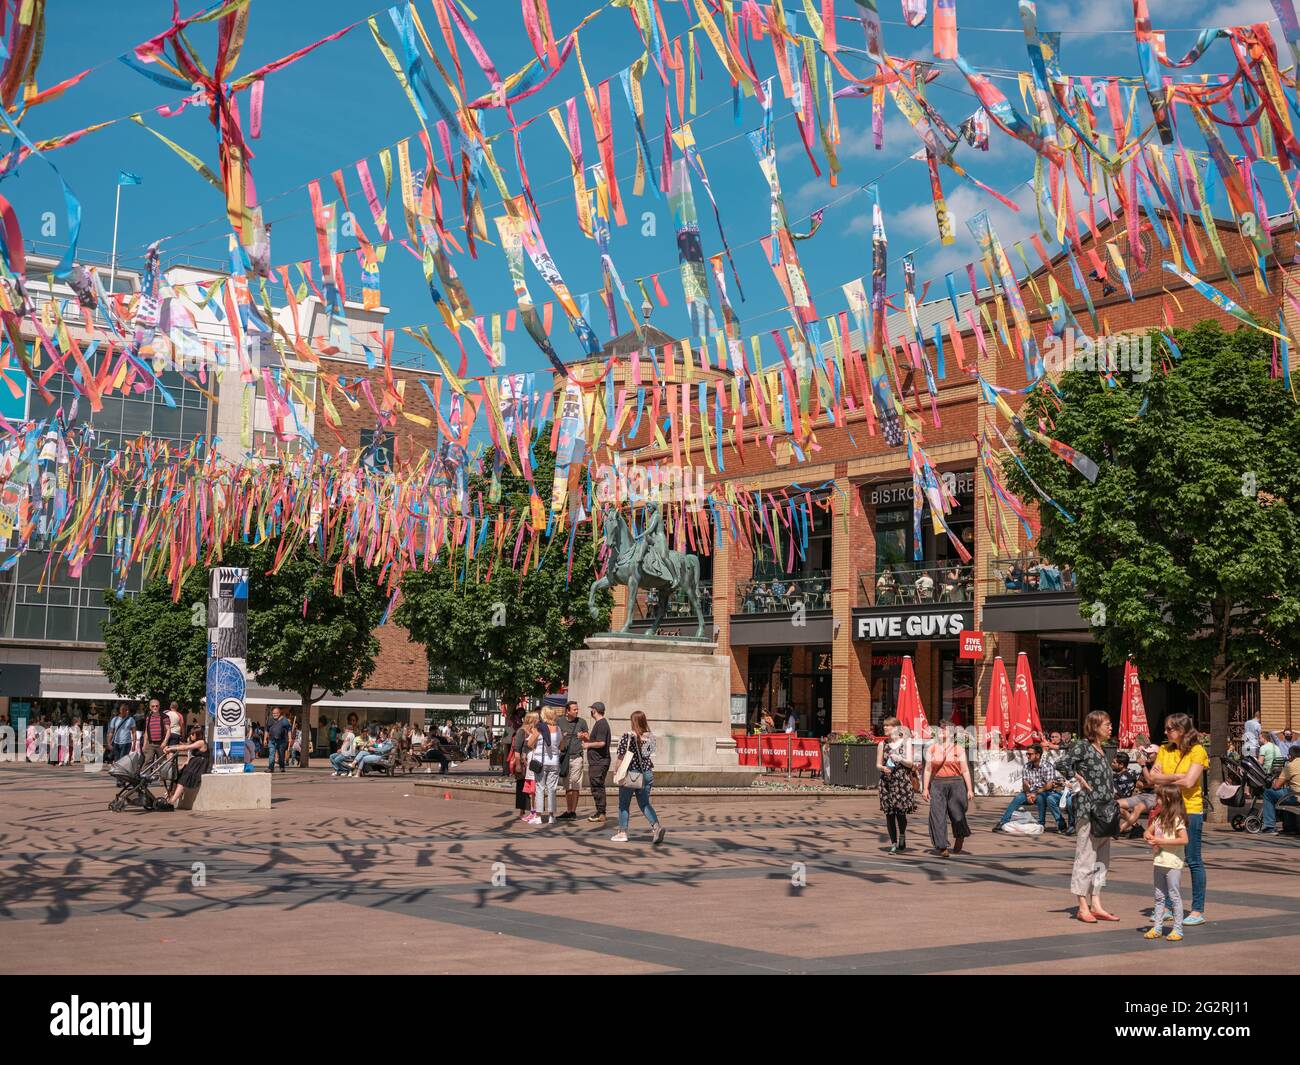 Broadgate, Coventry. Broadgate square is decorated with flags and banners to launch City of Culture 2021. The banners were designed by local schools. Stock Photo